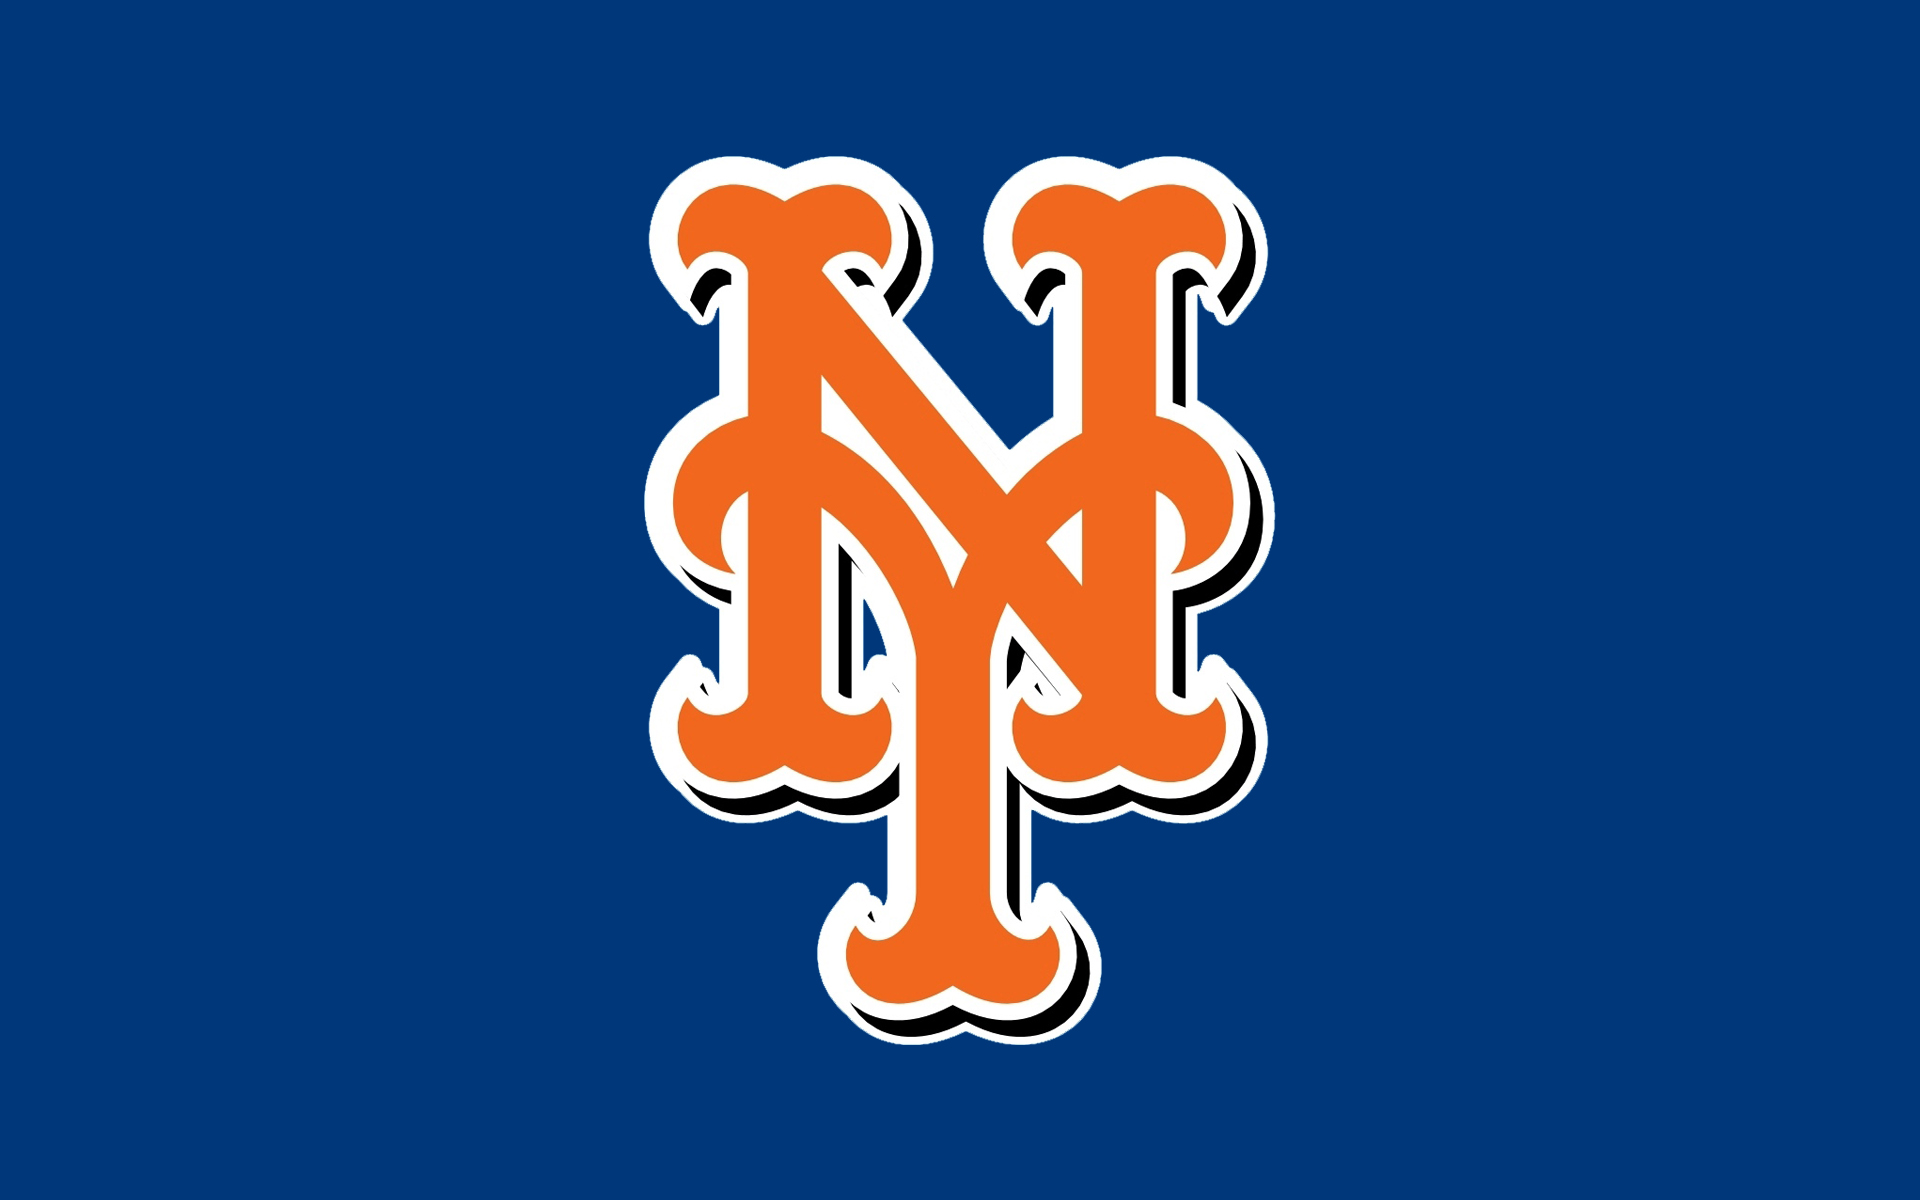 New York Mets wallpapers for desktop, download free New York Mets pictures  and backgrounds for PC